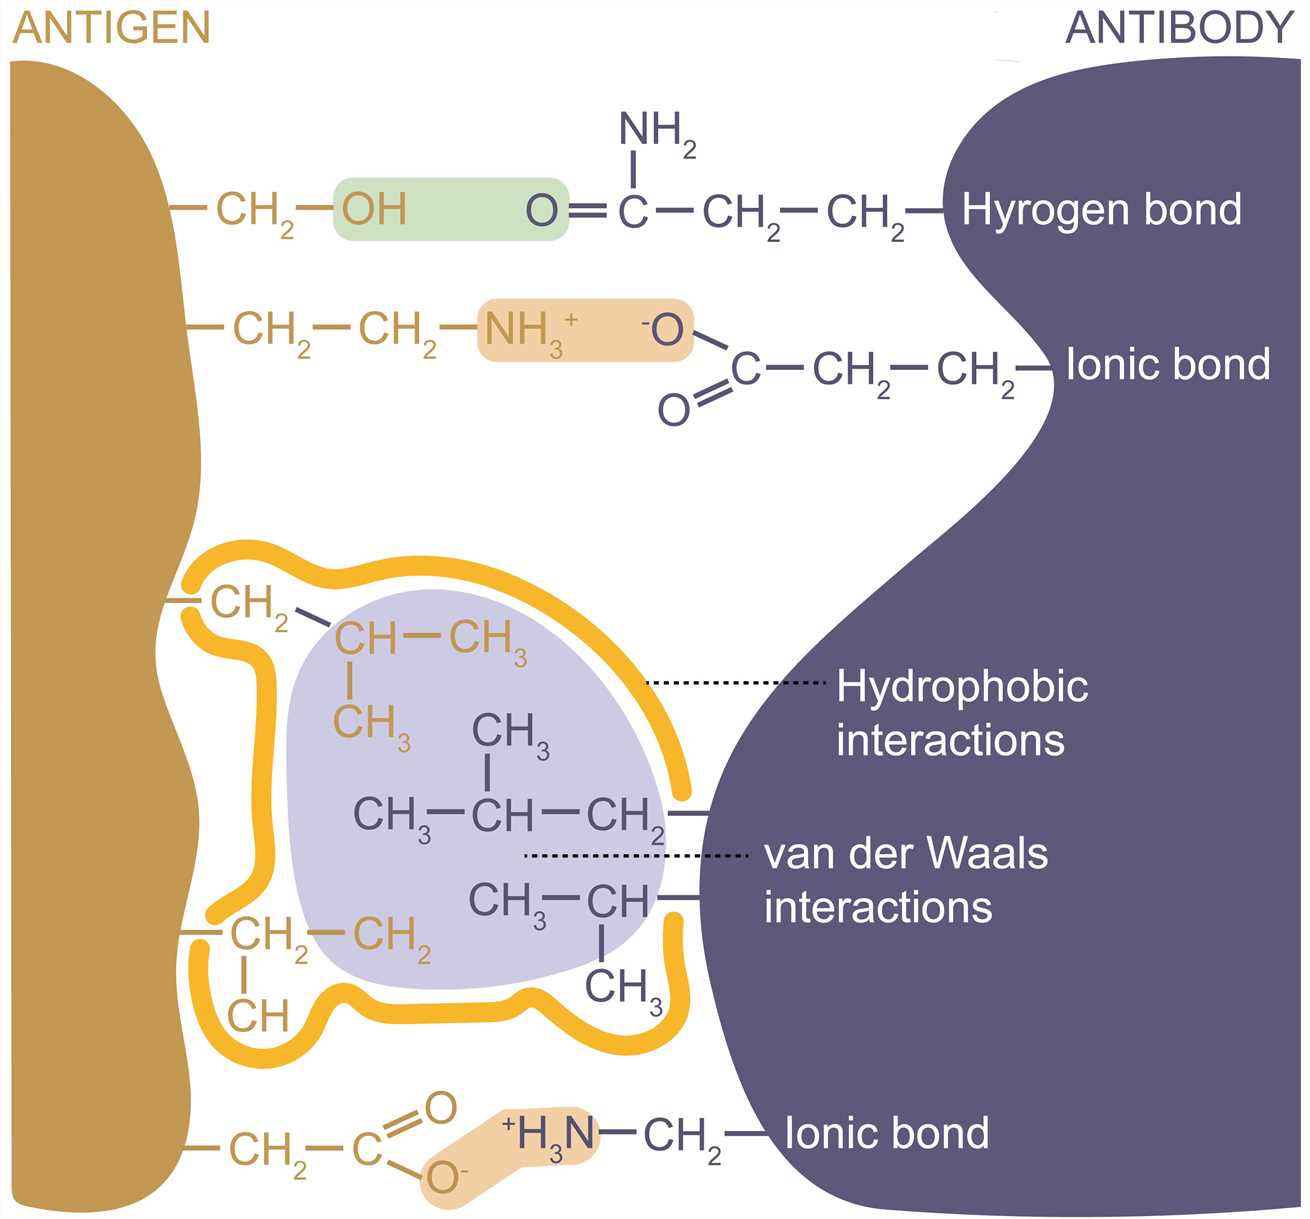 Forces involved in antigen-binding.